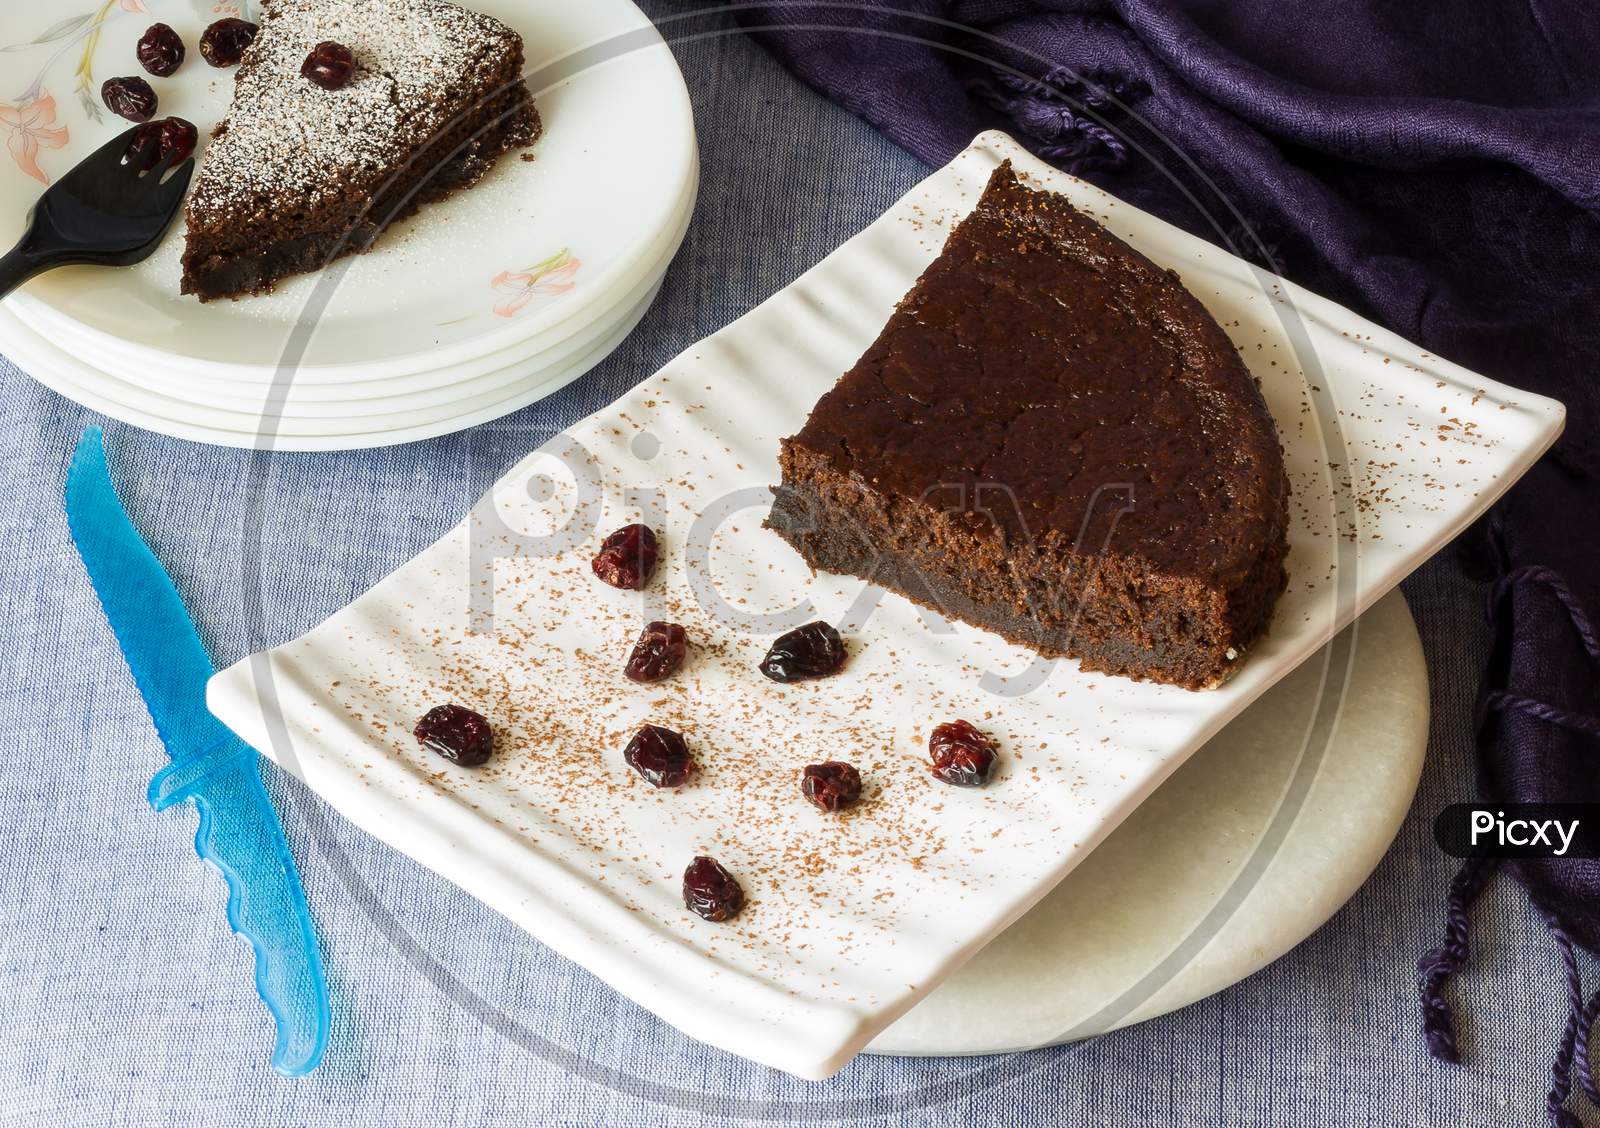 Two slices of dark chocolate cake with cranberry topping and dusting of icing sugar on top, served in white ceramic plates.Top view of delicious cake with knife and purple napkin tucked in the corner